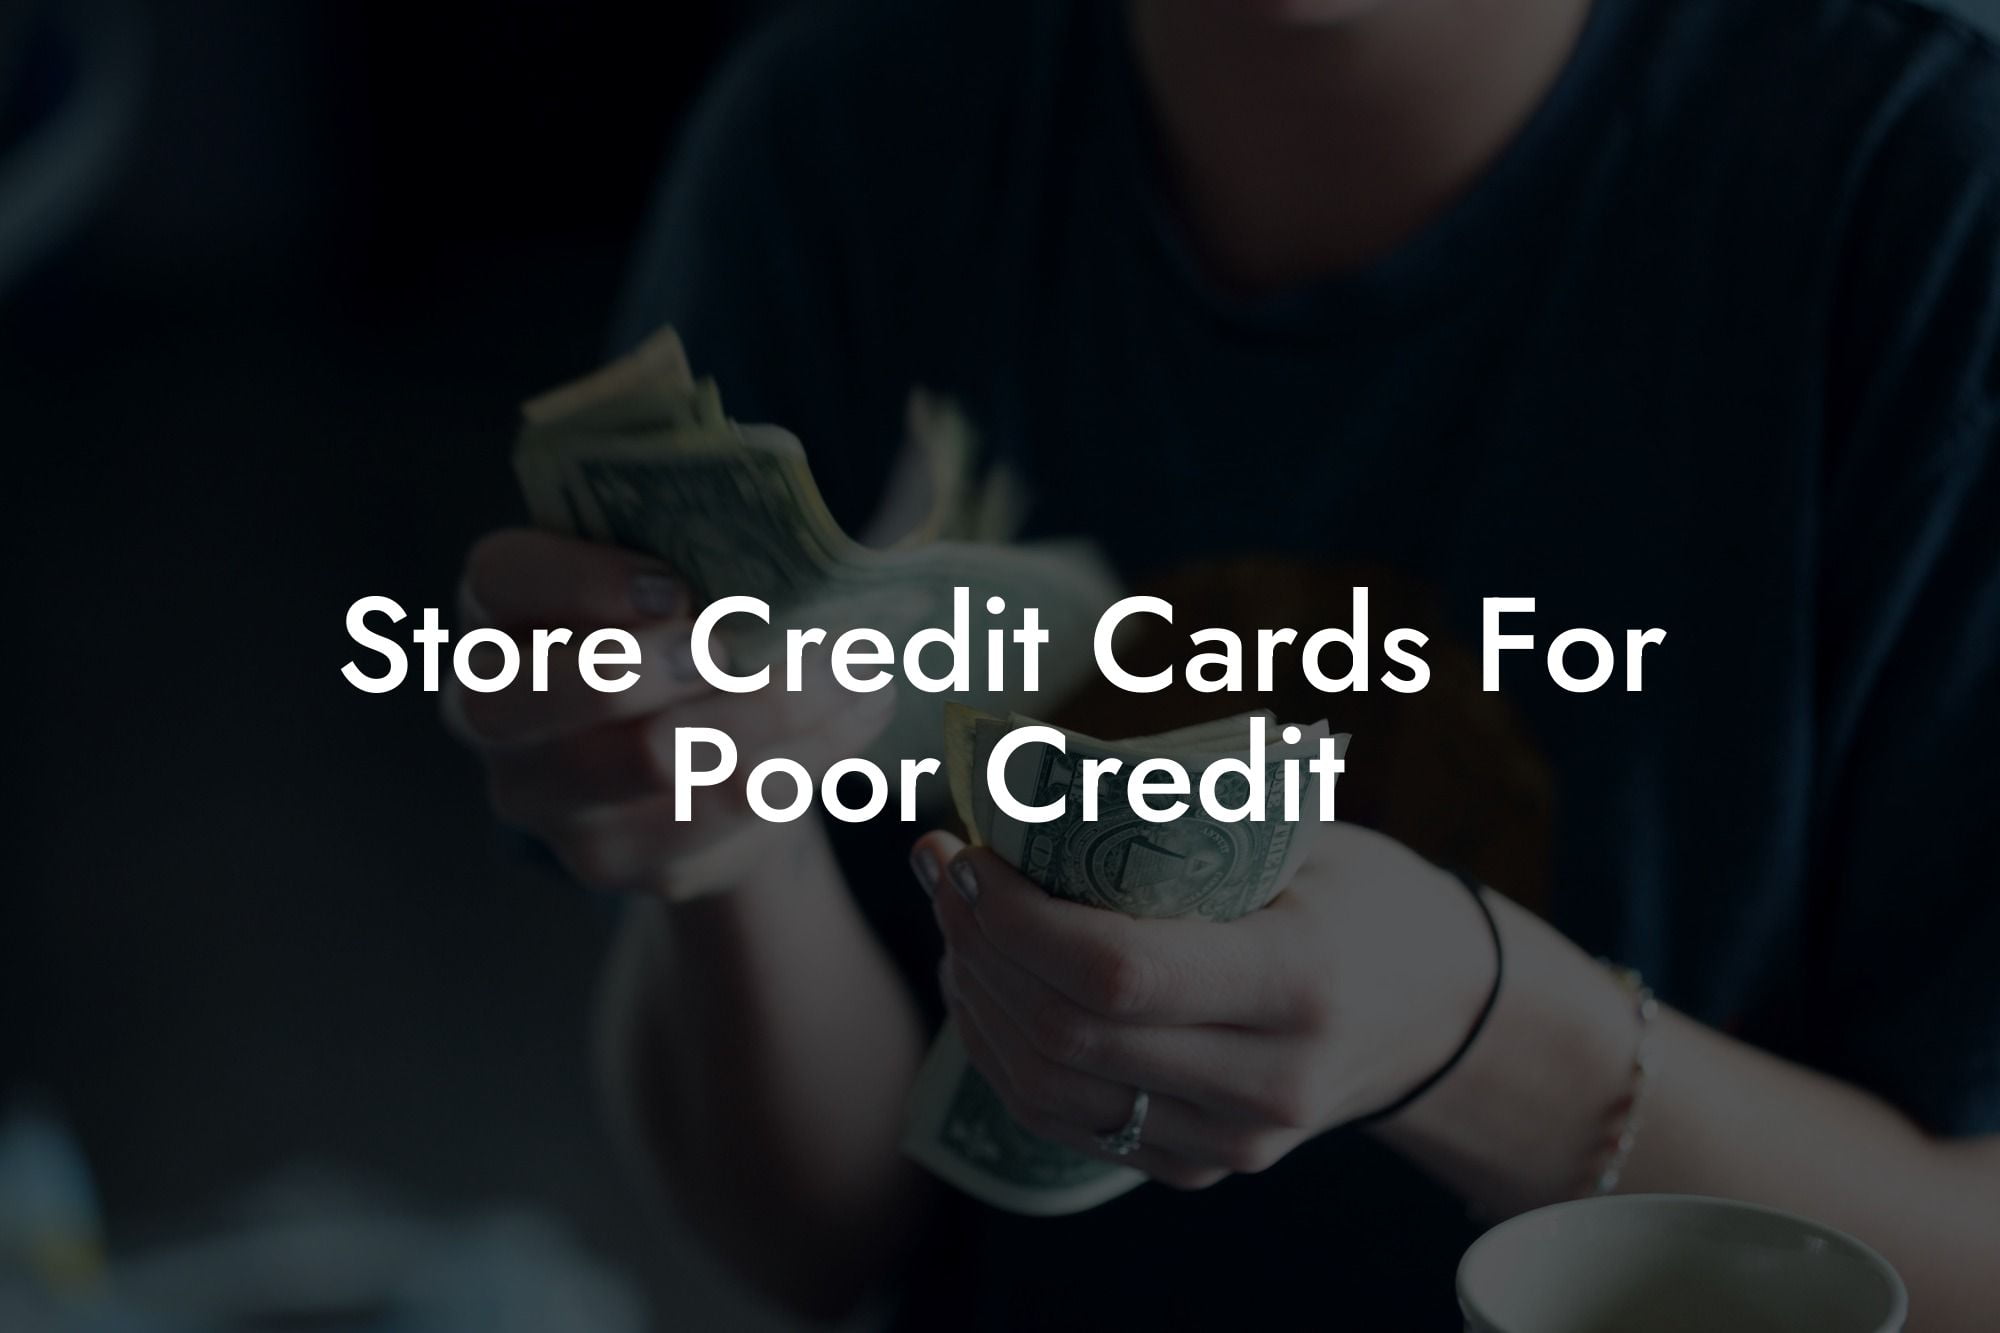 Store Credit Cards For Poor Credit